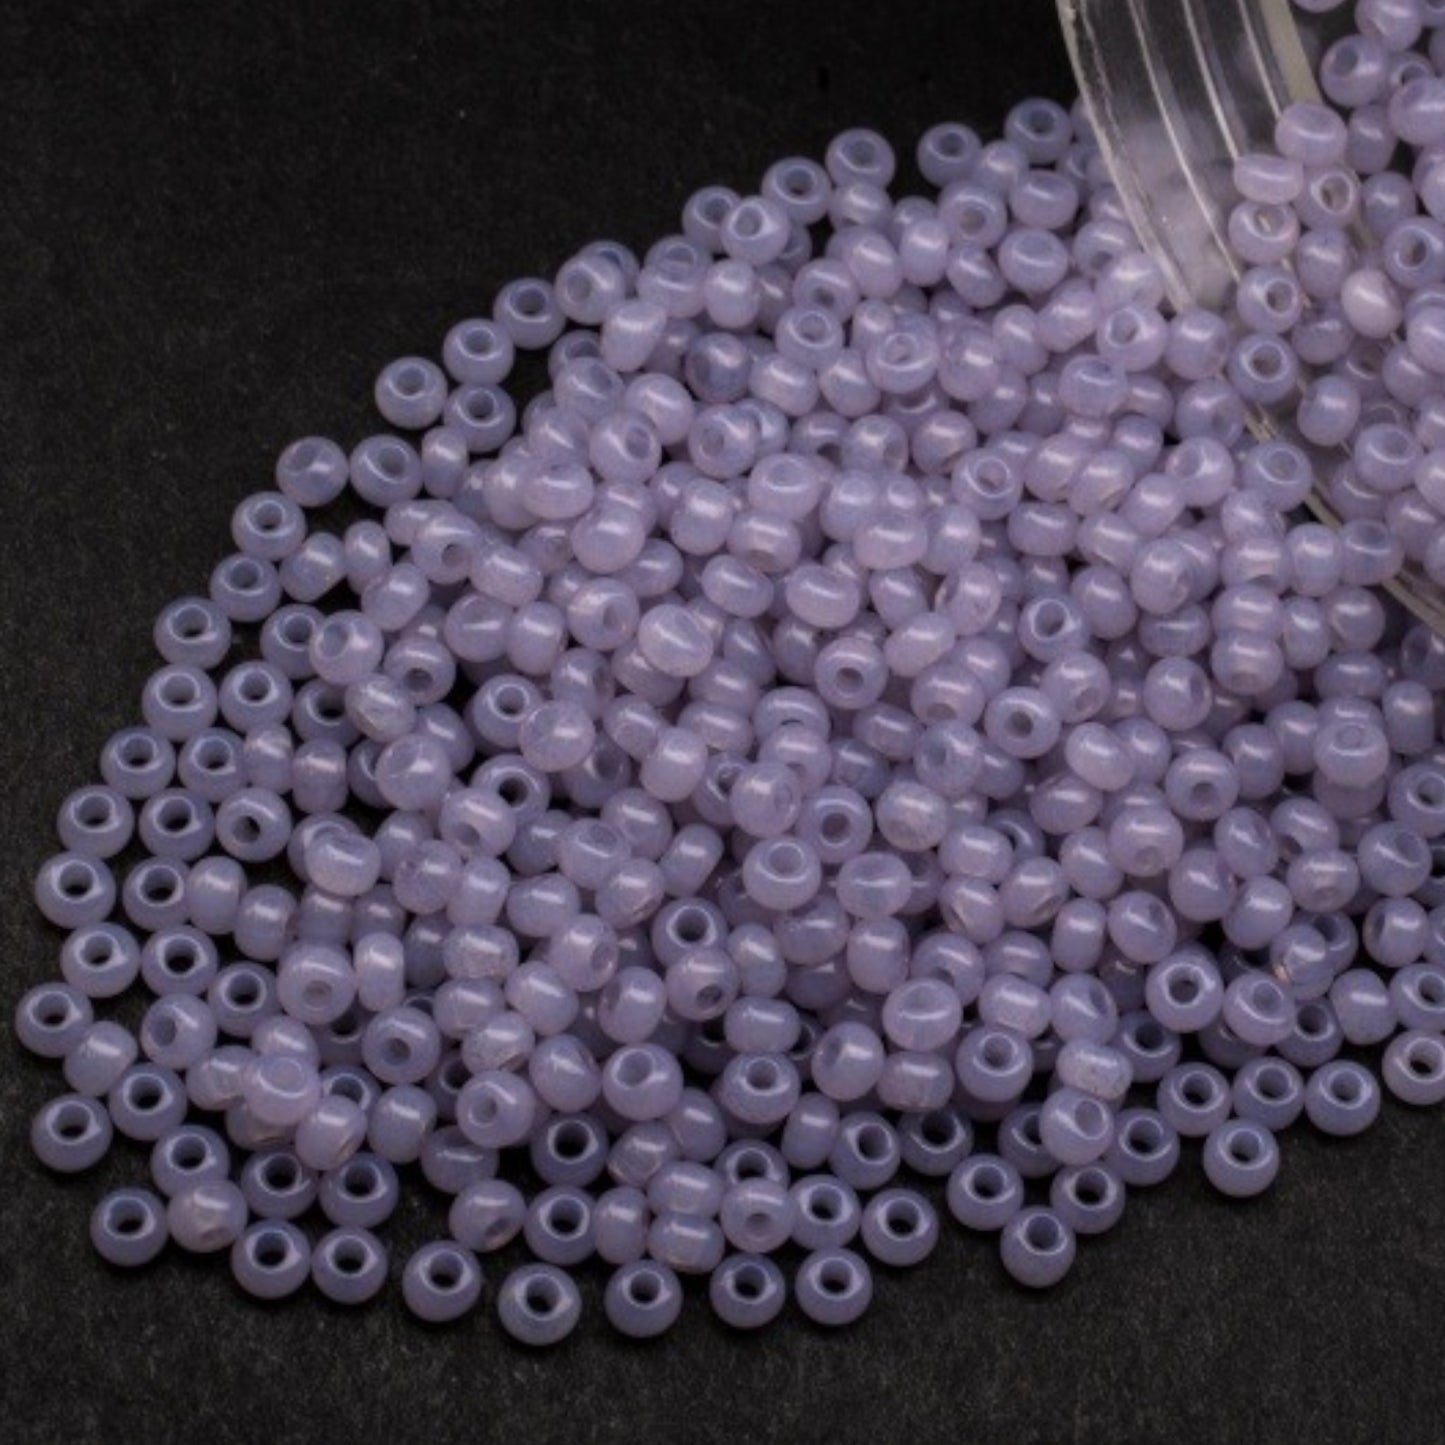 02621 Czech seed beads PRECIOSA round 10/0 lilac. Alabaster - Solgel Dyed.